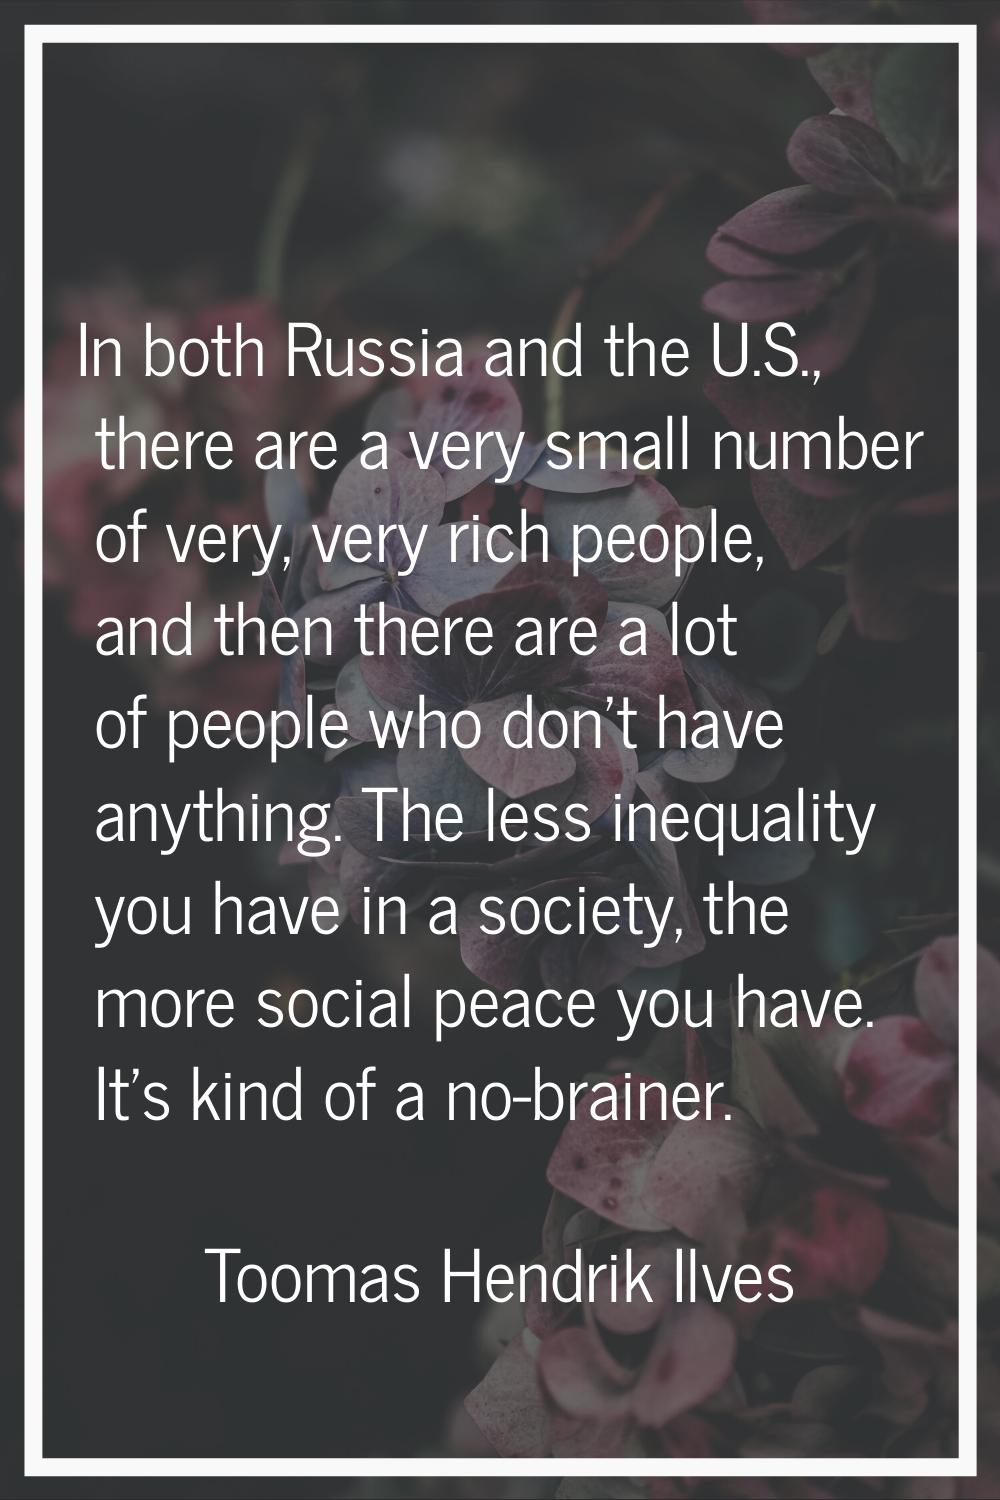 In both Russia and the U.S., there are a very small number of very, very rich people, and then ther